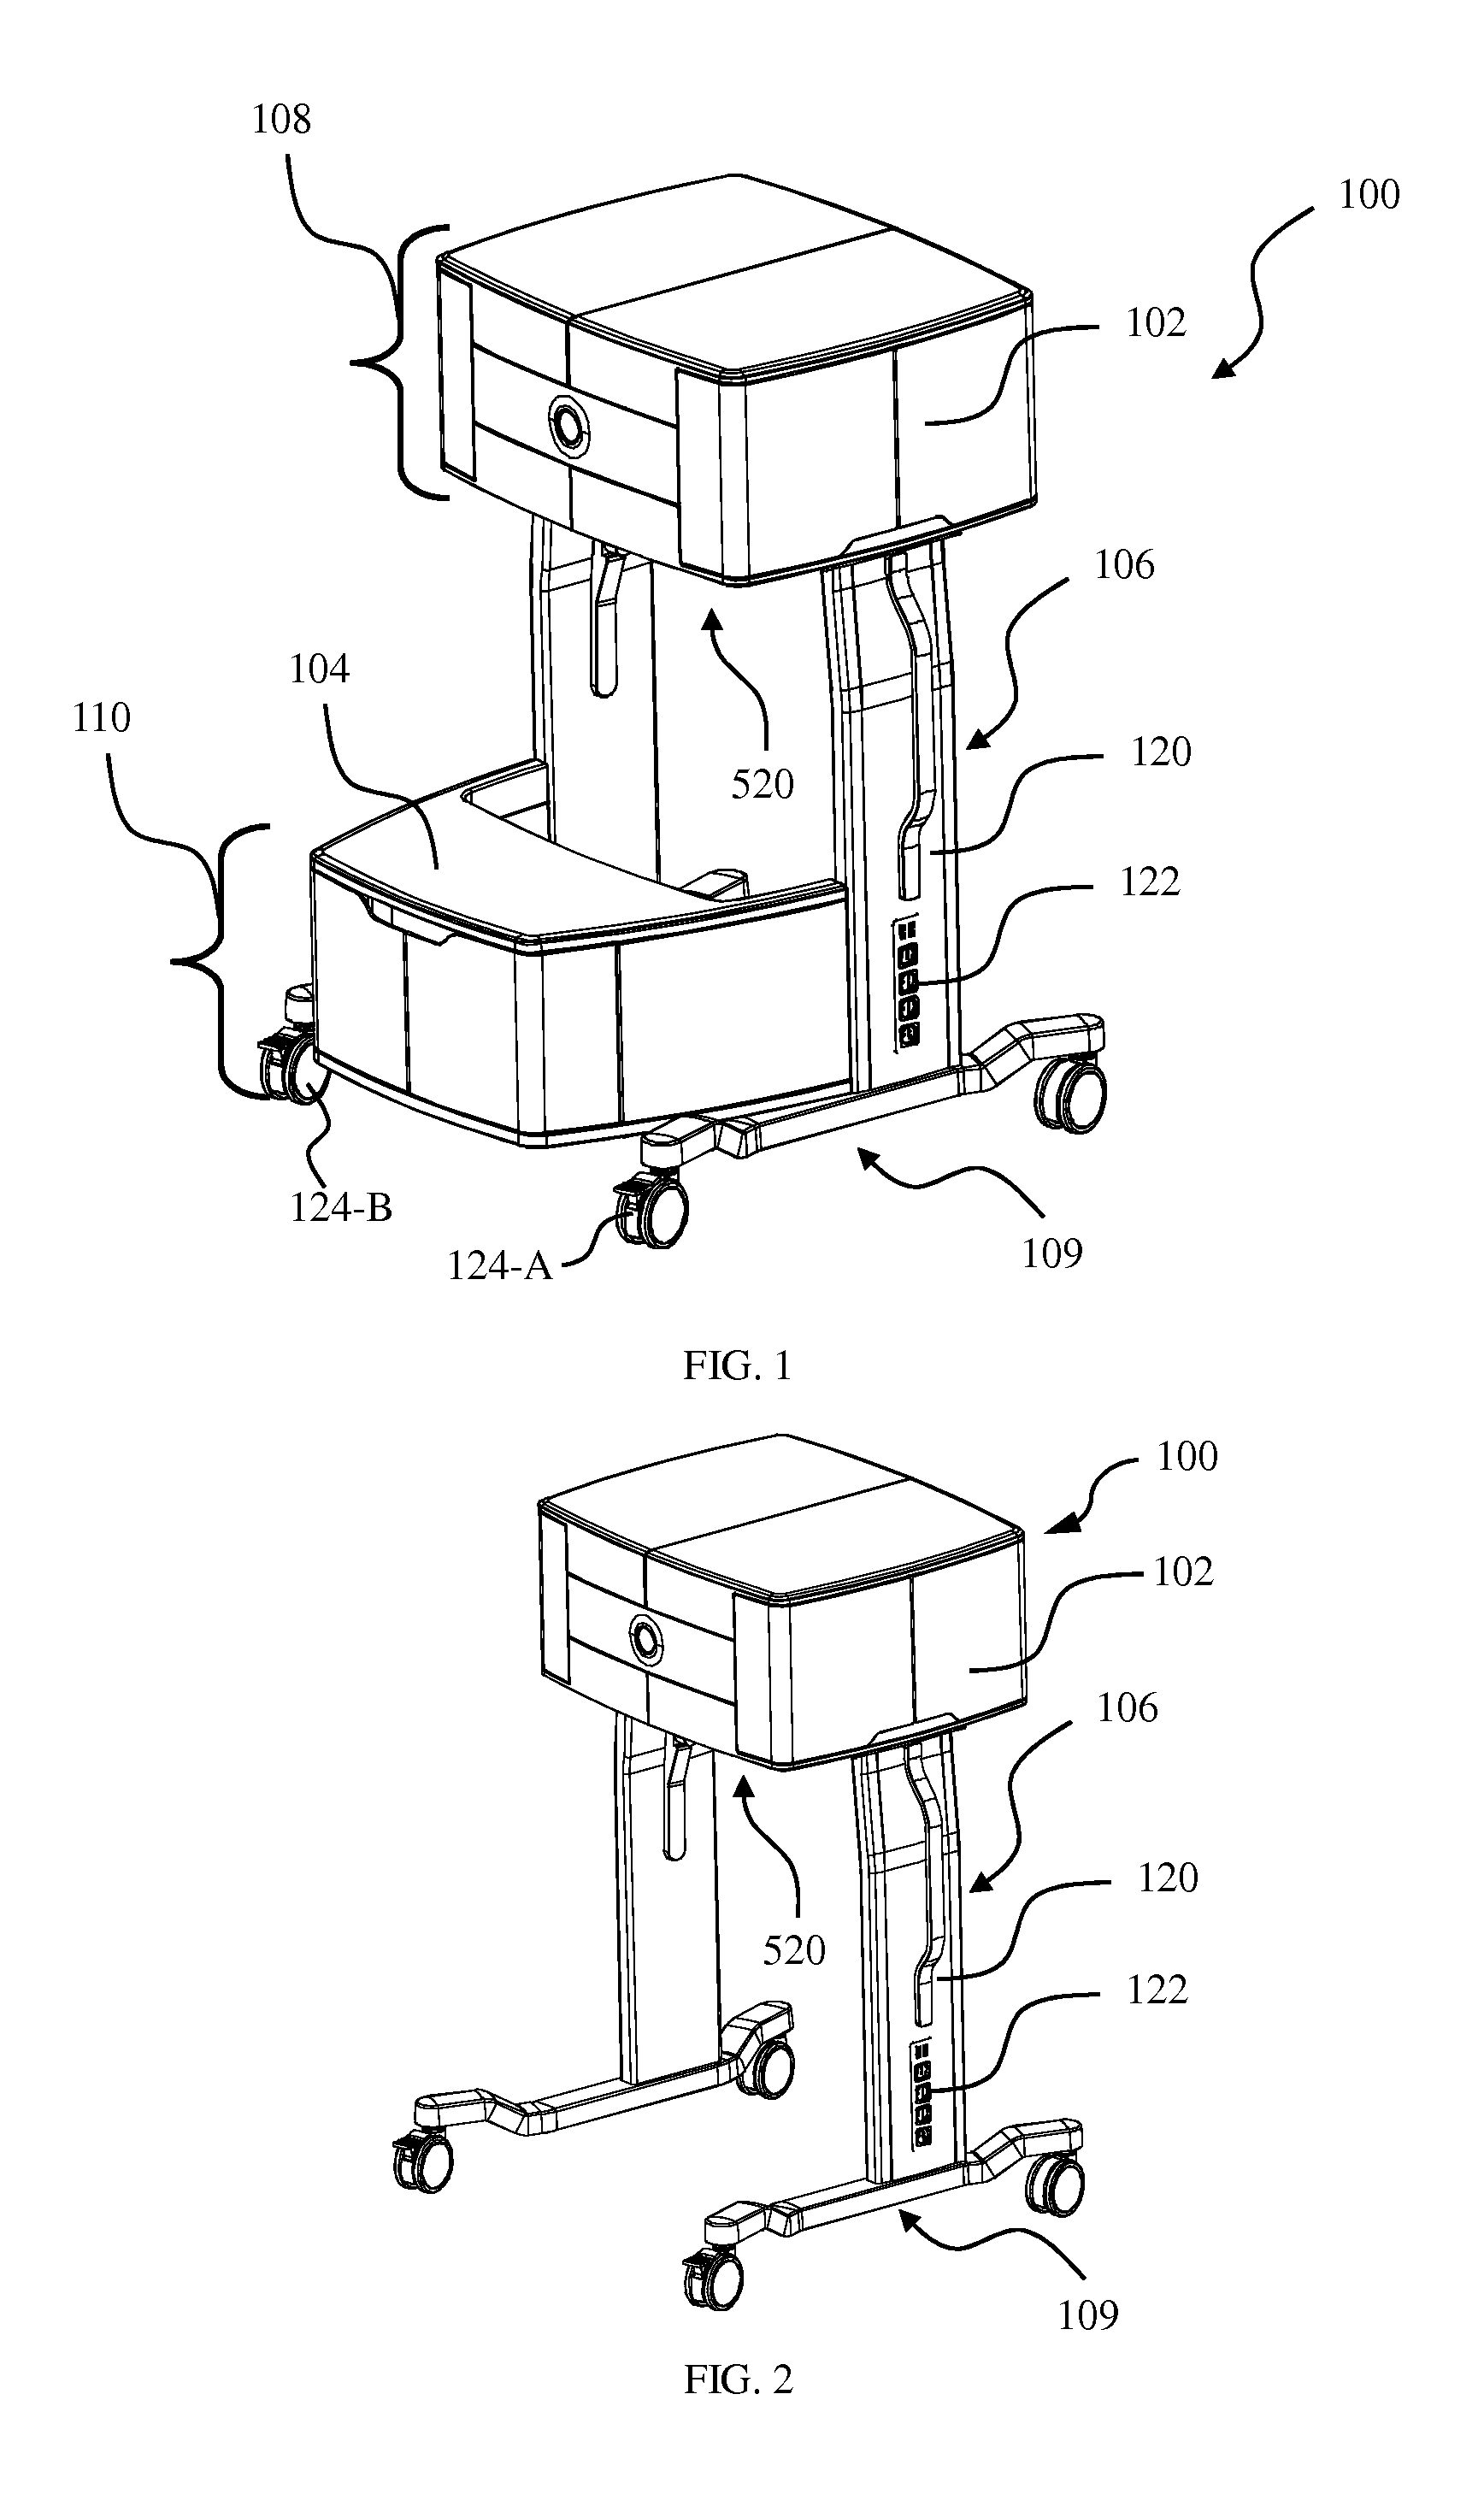 Integrated modular system for managing plurality of medical devices